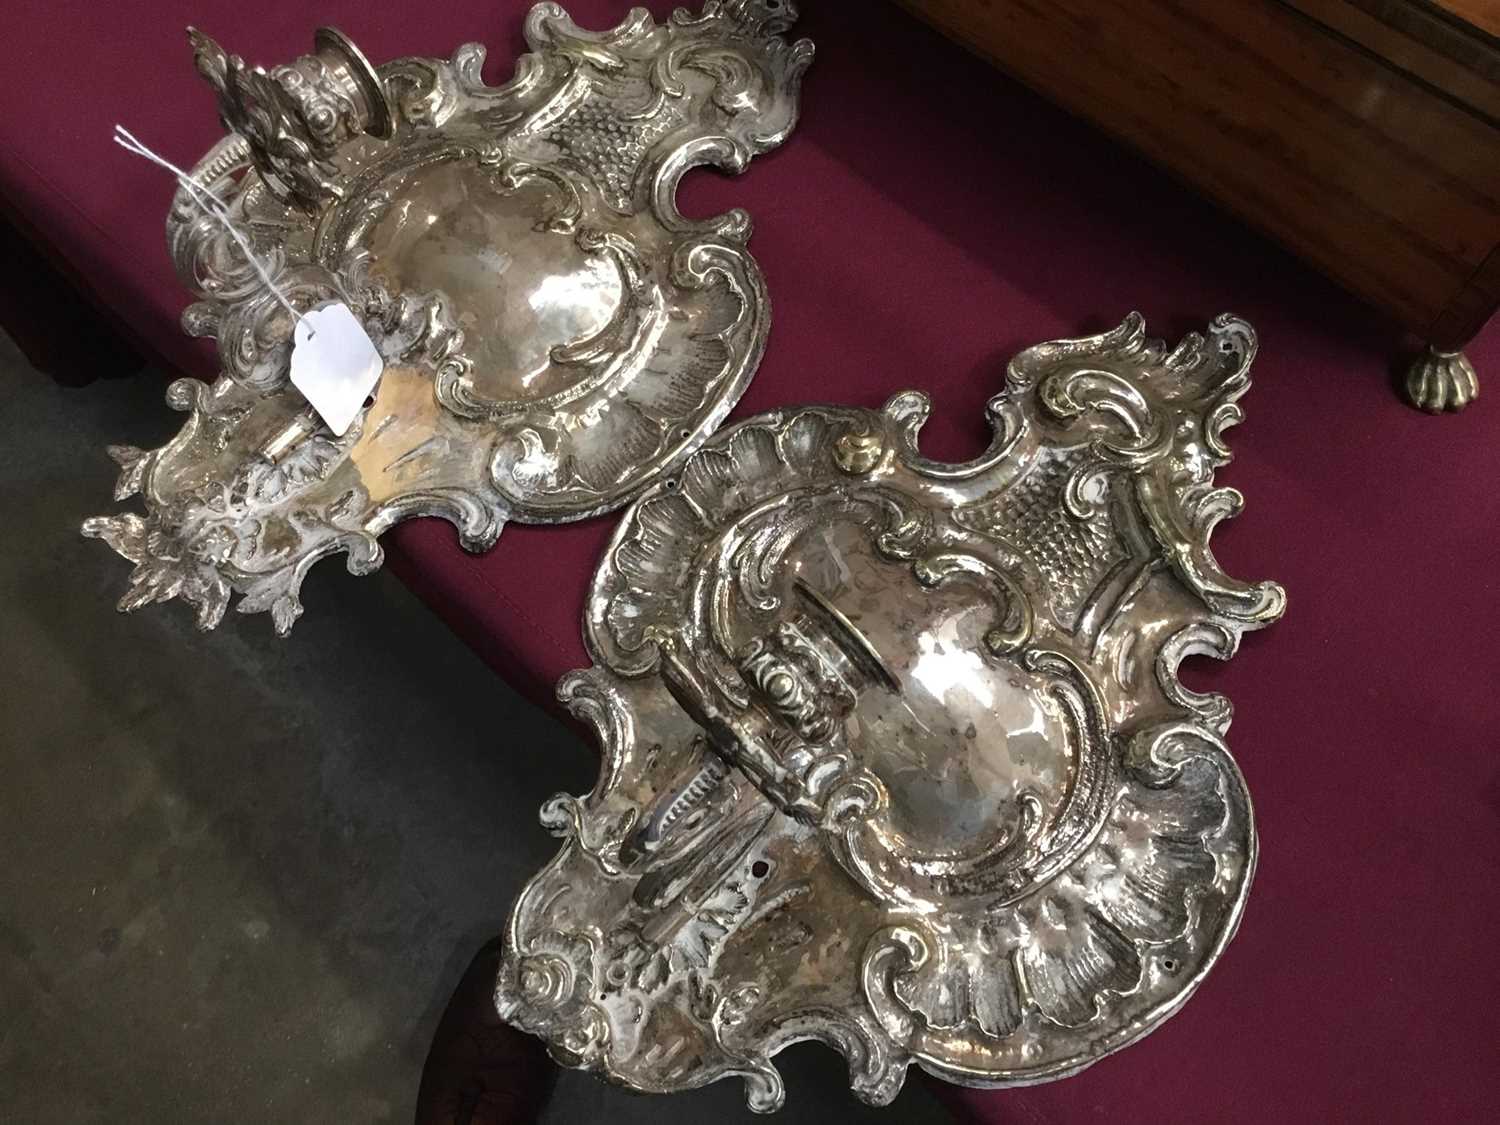 Pair of 19th century silvered rococo style wall sconces, cartouche form with projecting scrolled can - Image 4 of 5